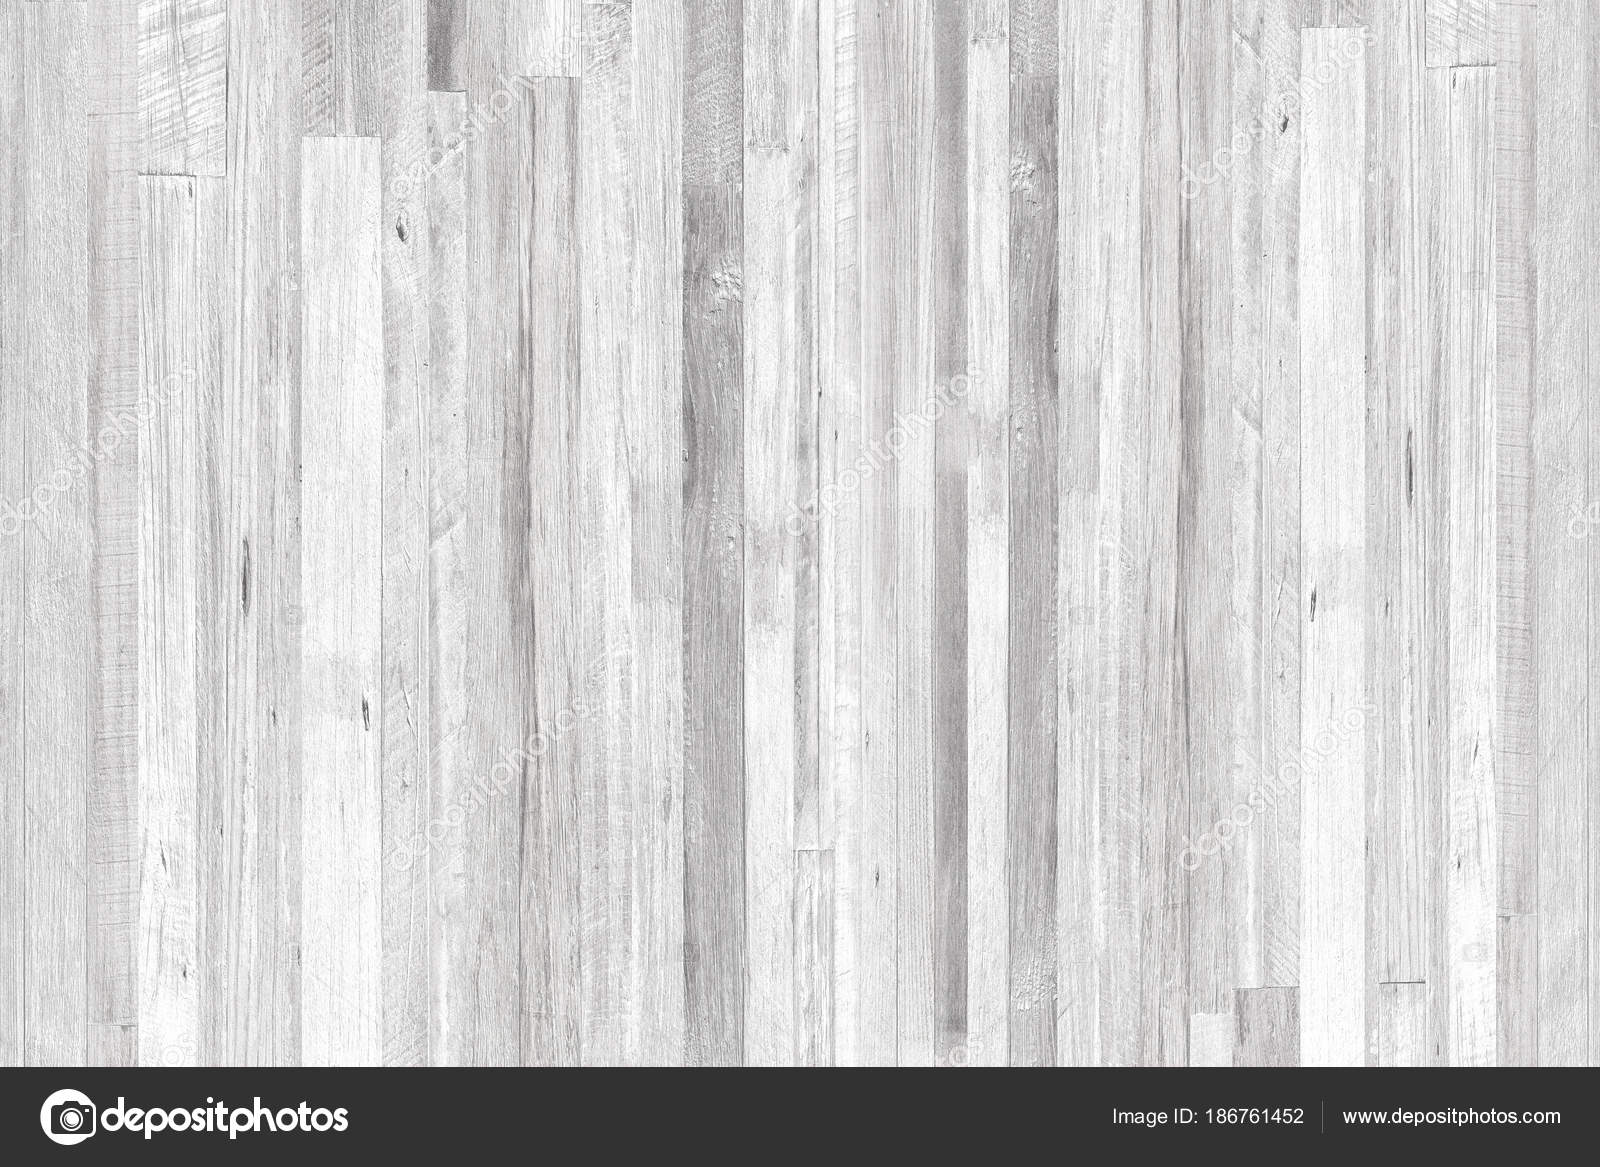 White washed wooden planks, Vintage White Wood Wall — Stock Photo © ivo_13 186761452